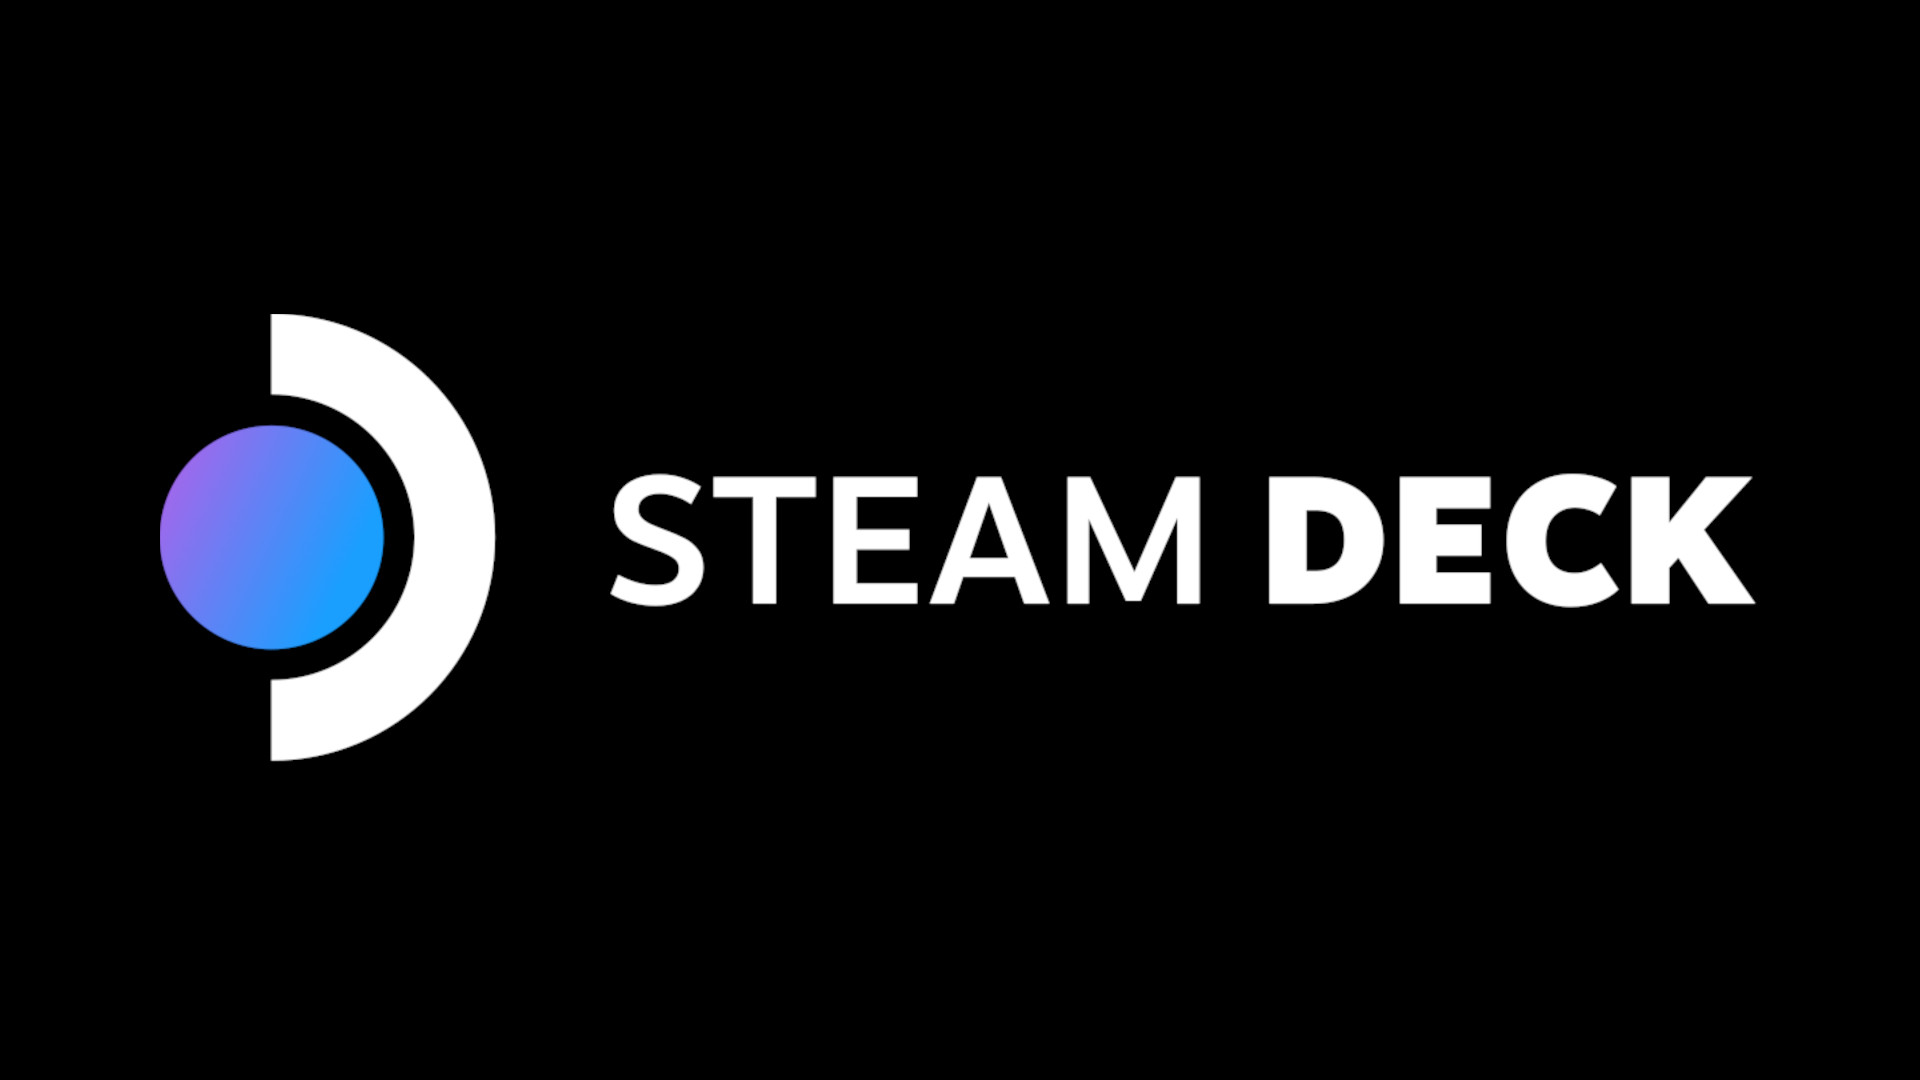 Steam Deck 2 – release date, price, specs, and performance